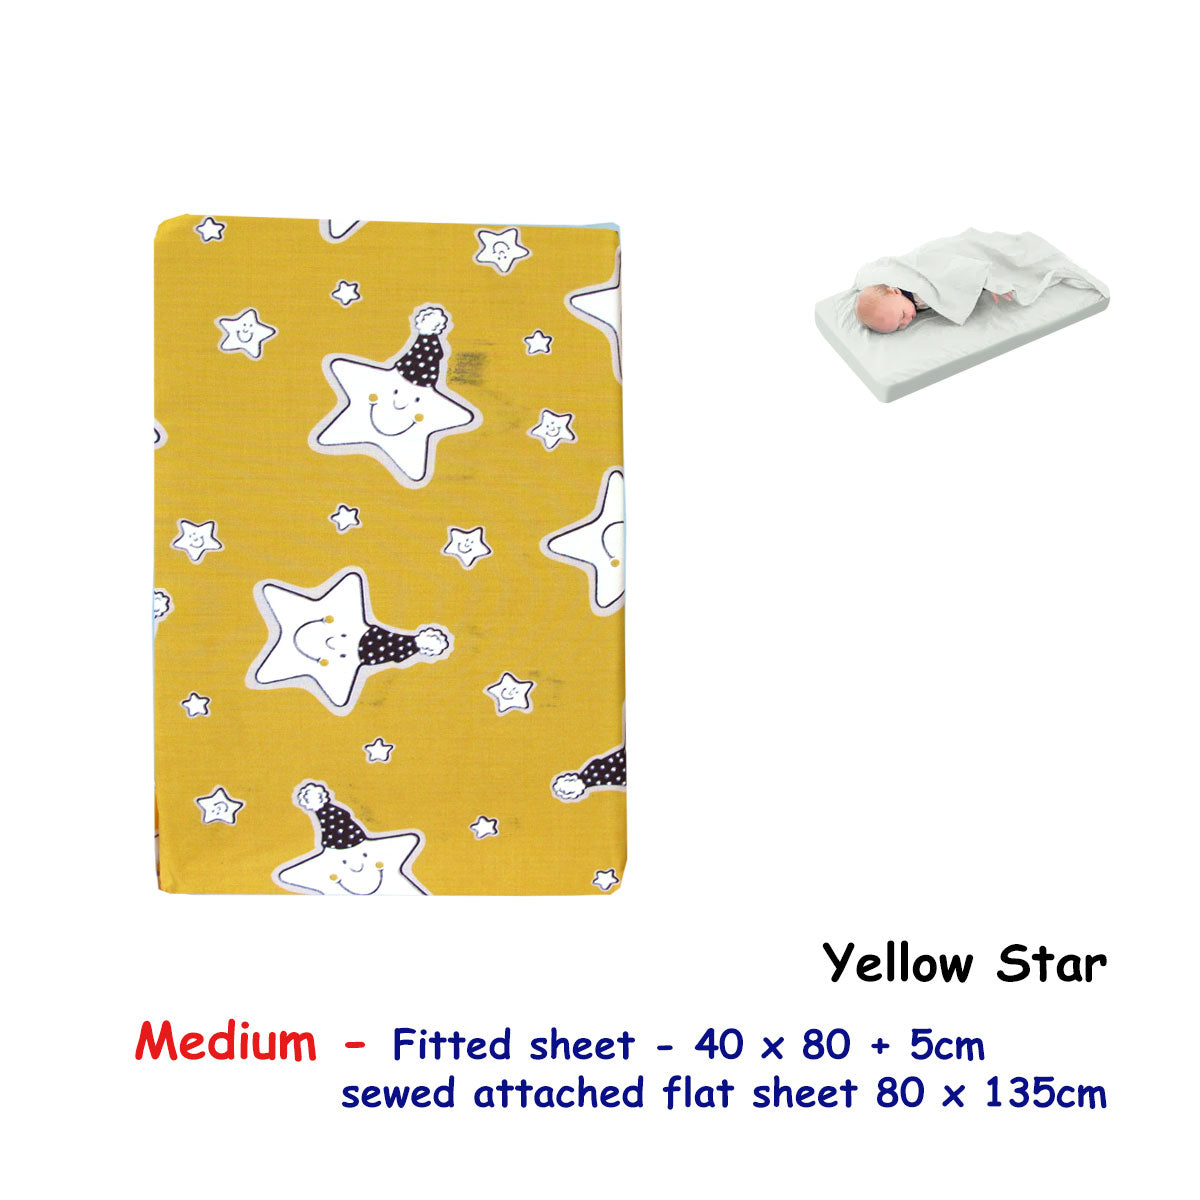 Yellow Star Bassinet Fitted Sheet with a Flat Sheet Sewed Attached